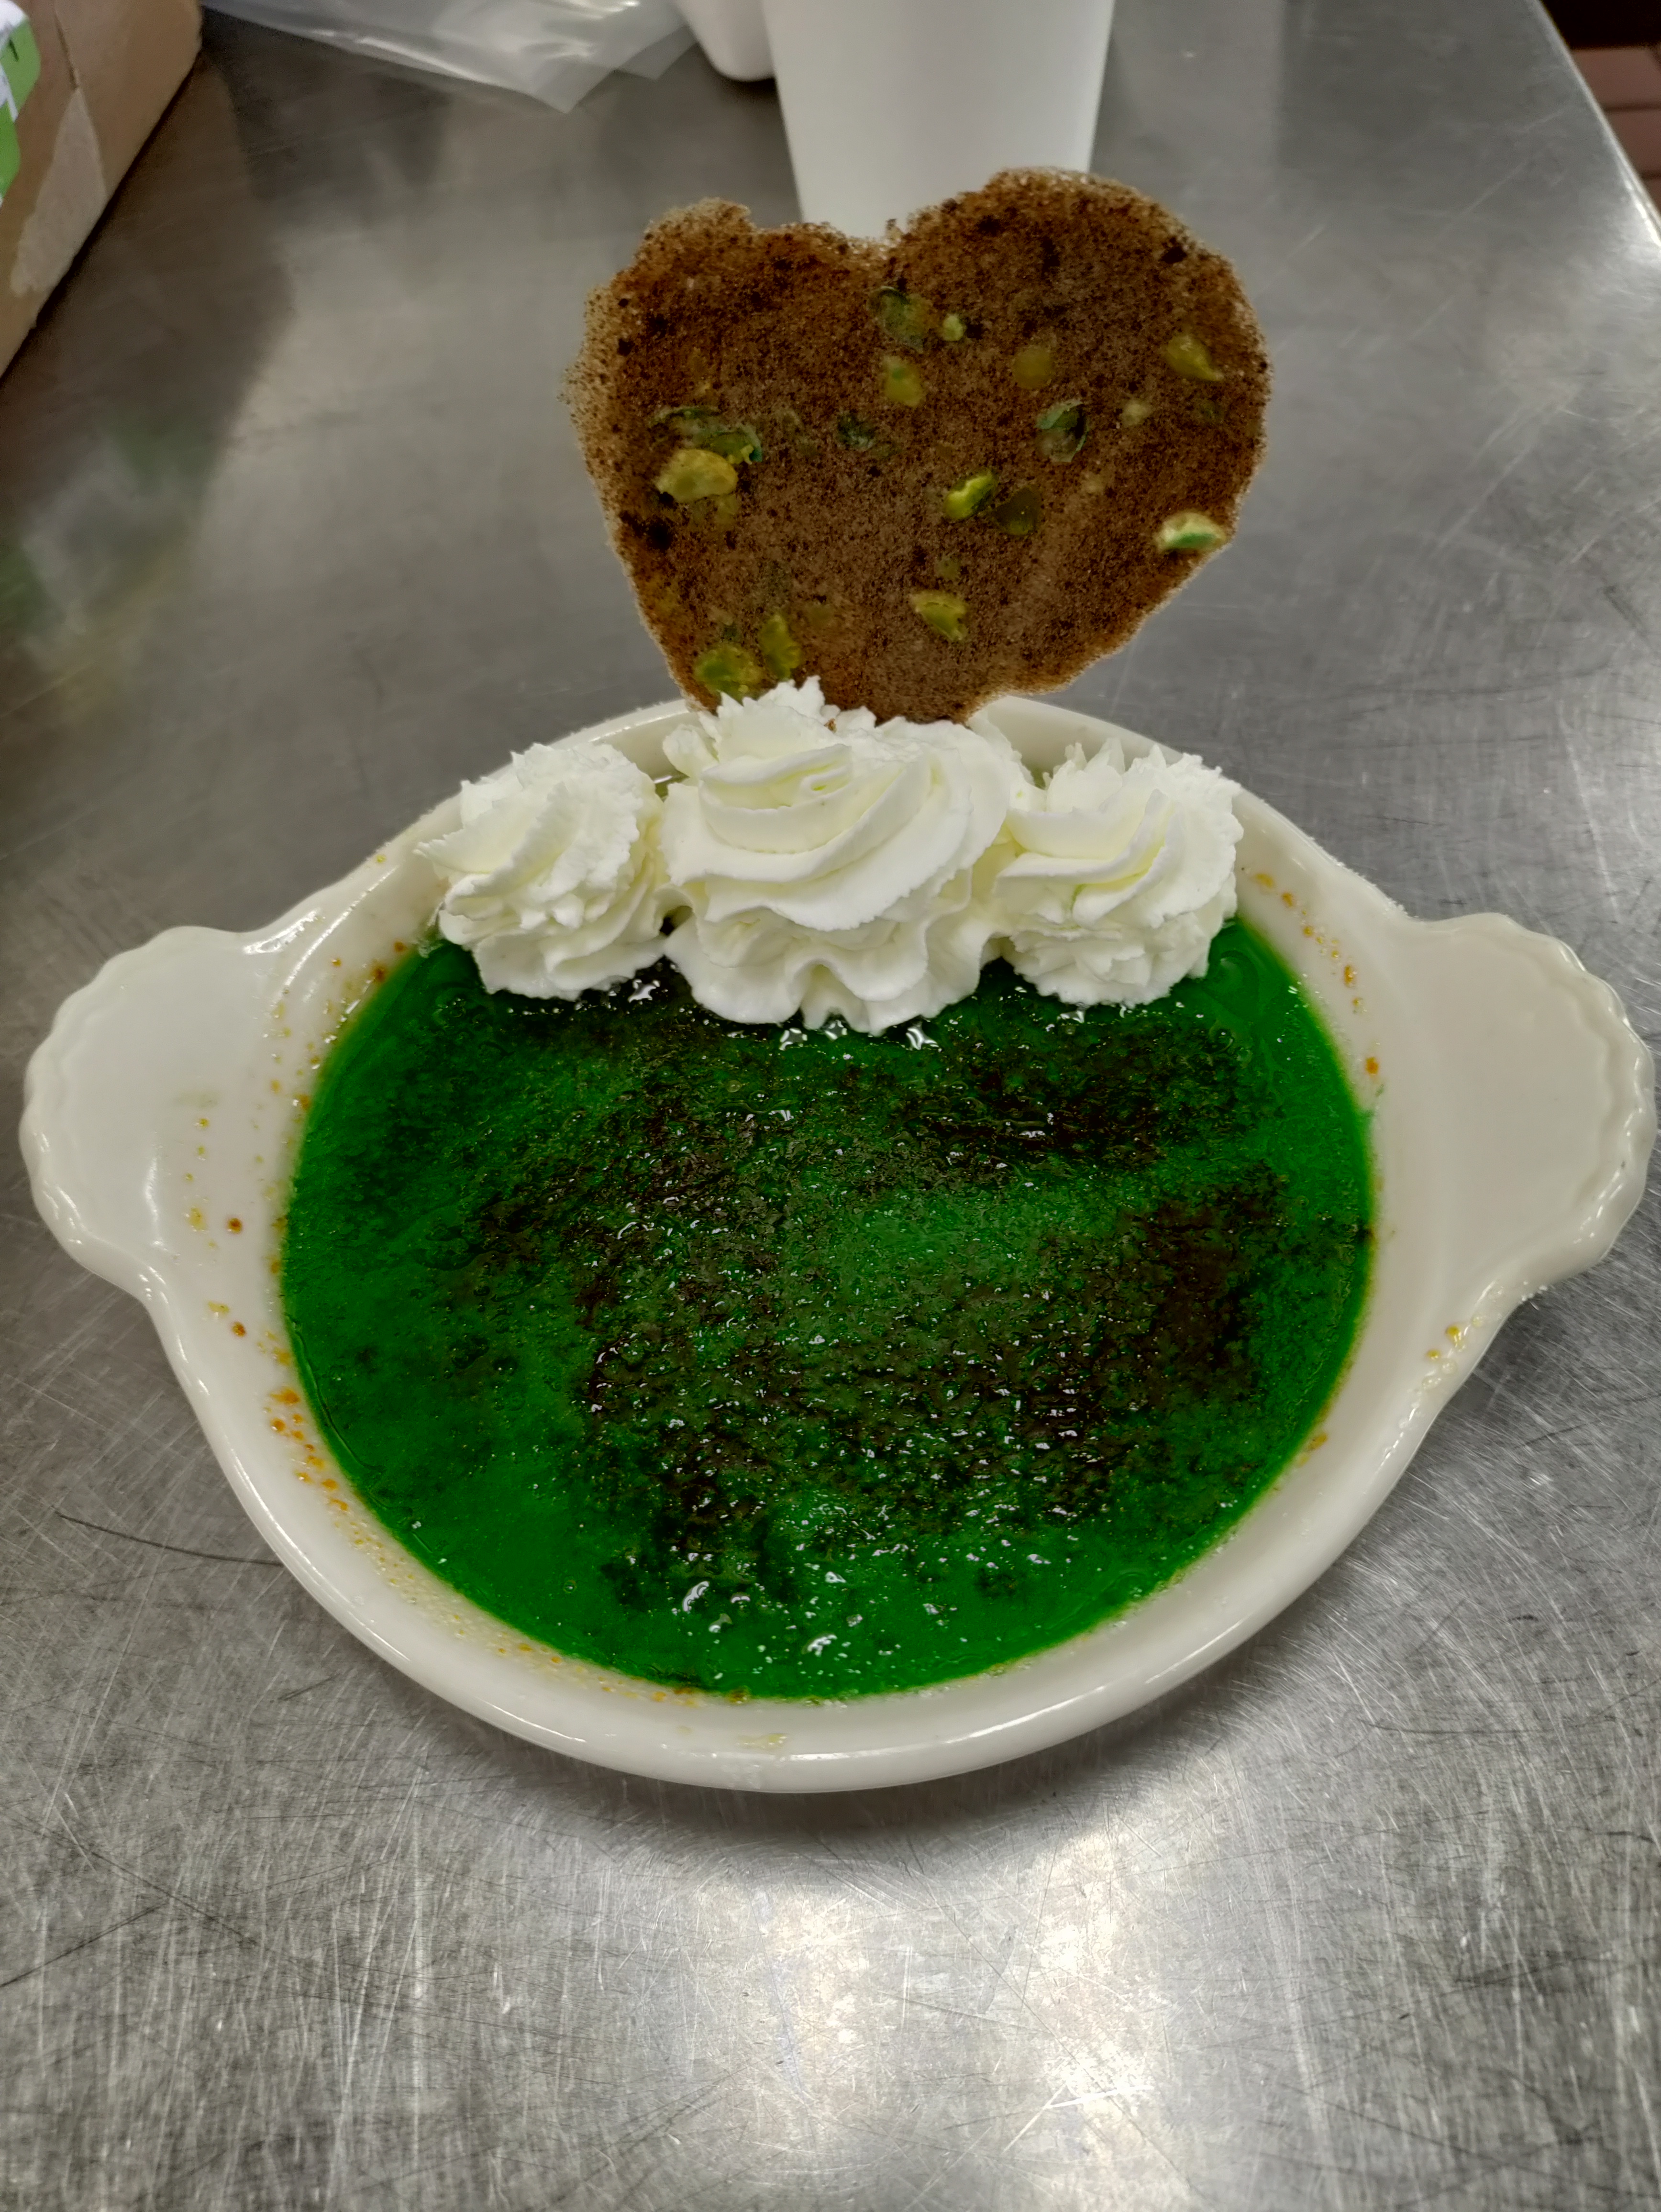 a vivid green creme brulee dessert in a ceramic ramekin garnished with whipped cream and a heart shaped tuile with visible chunks of wasabi peas and oreo dust